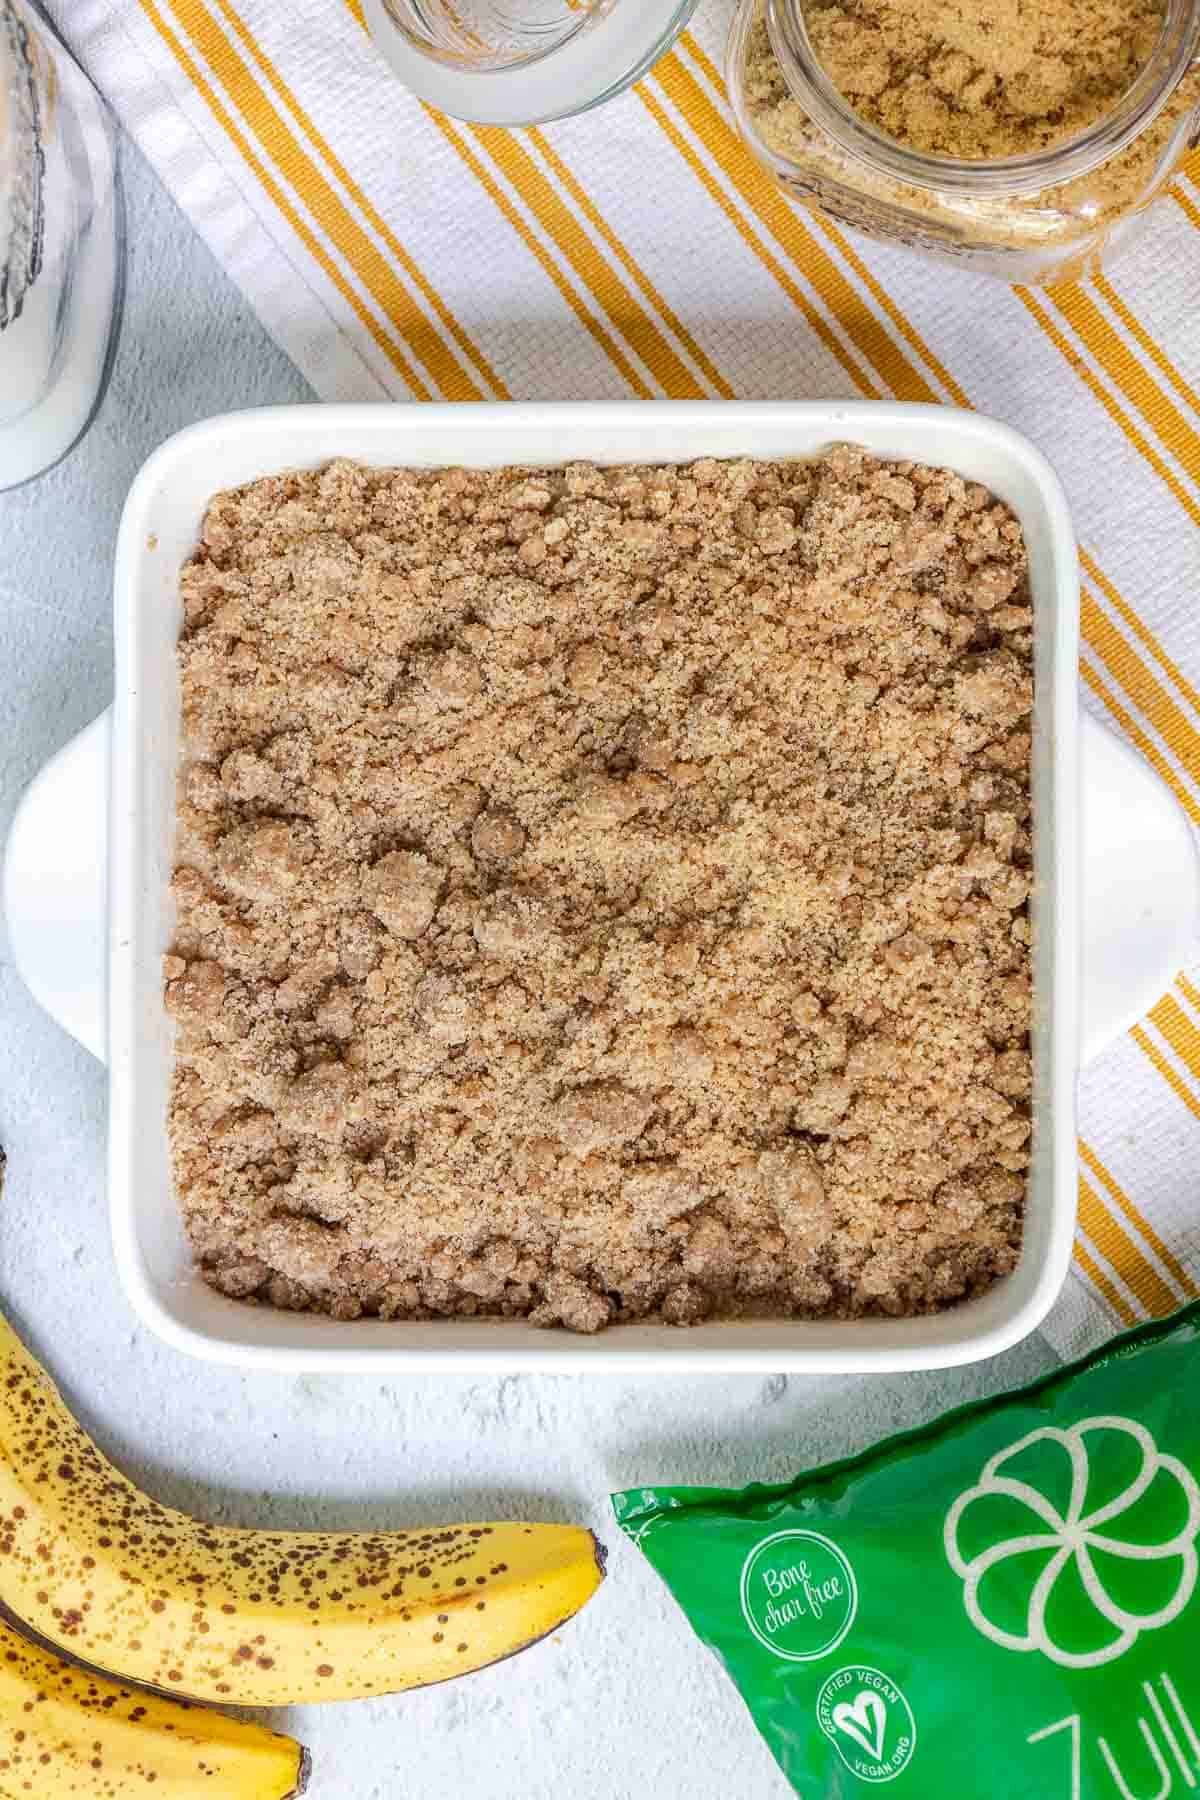 The crumble topping is sprinkled evenly over the cake batter for full coverage